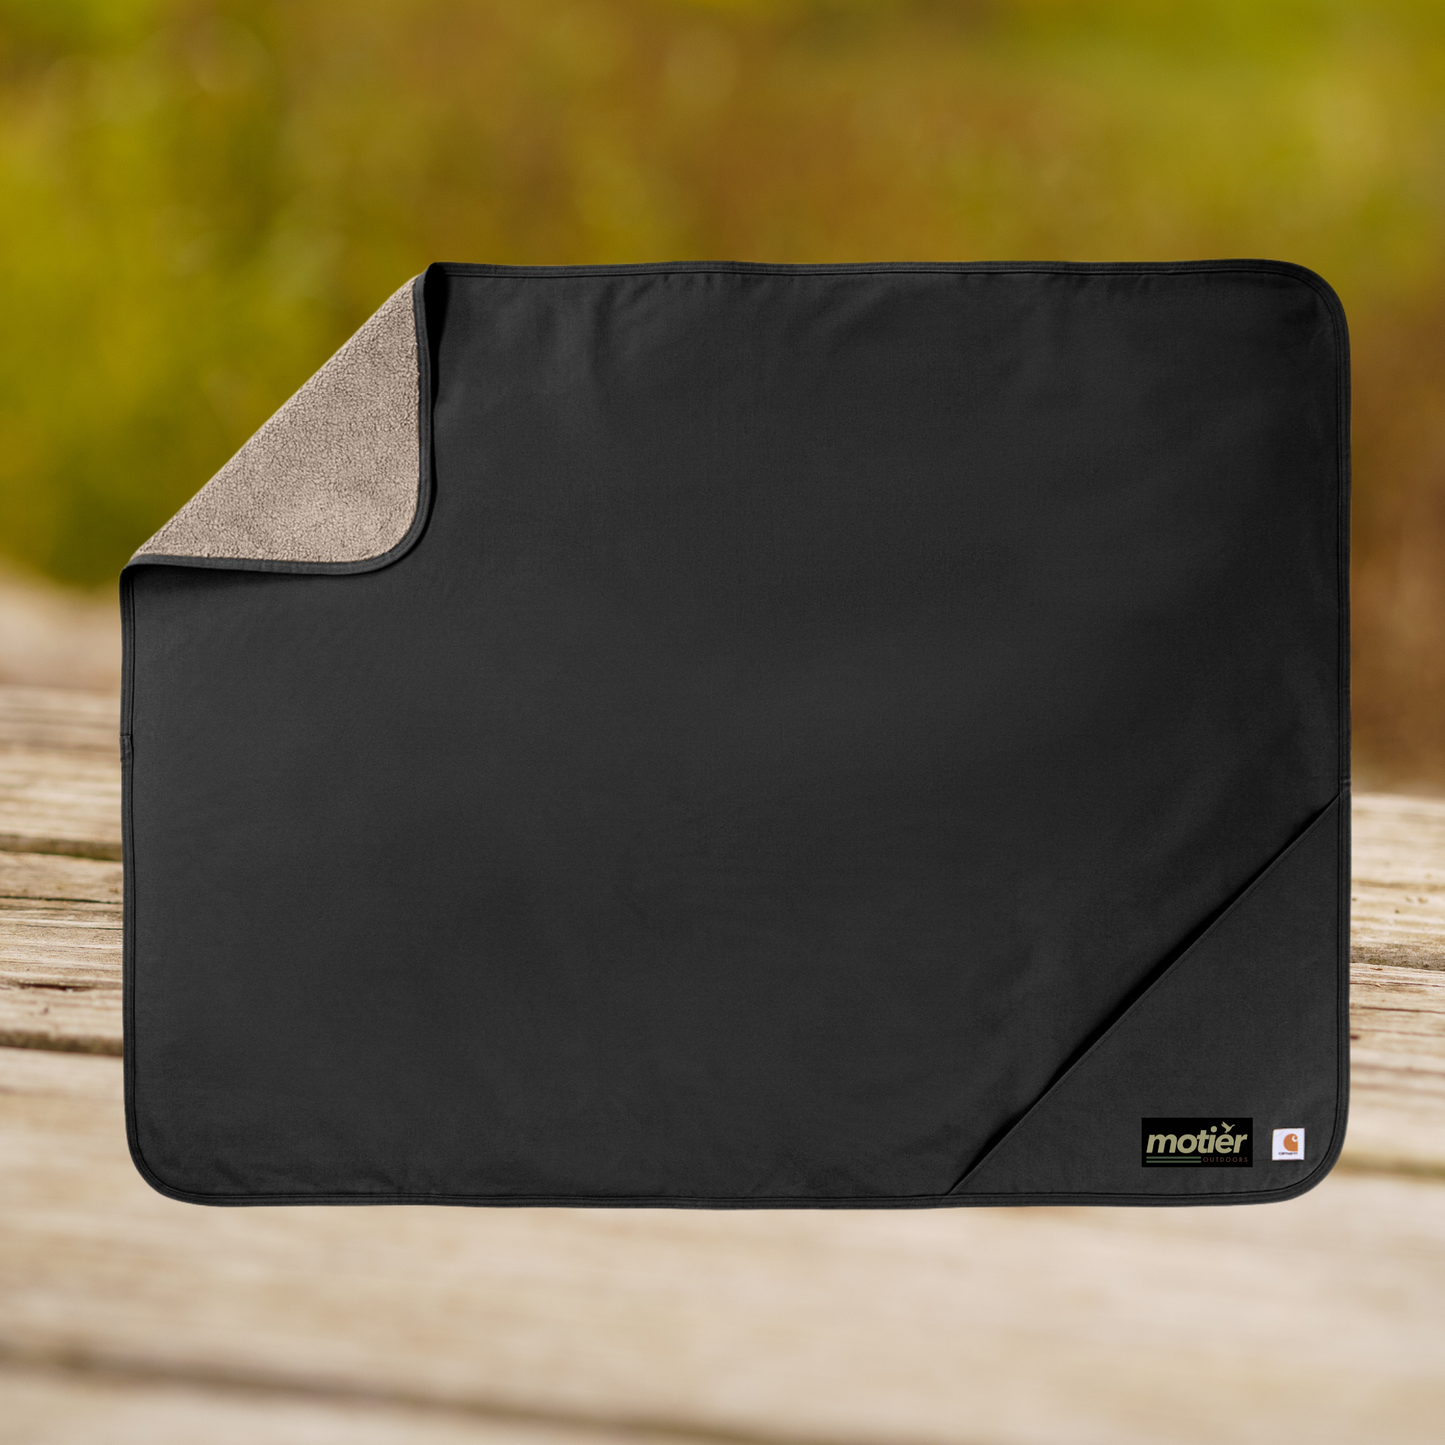 The Motier Outdoors Utility Blanket (Black)